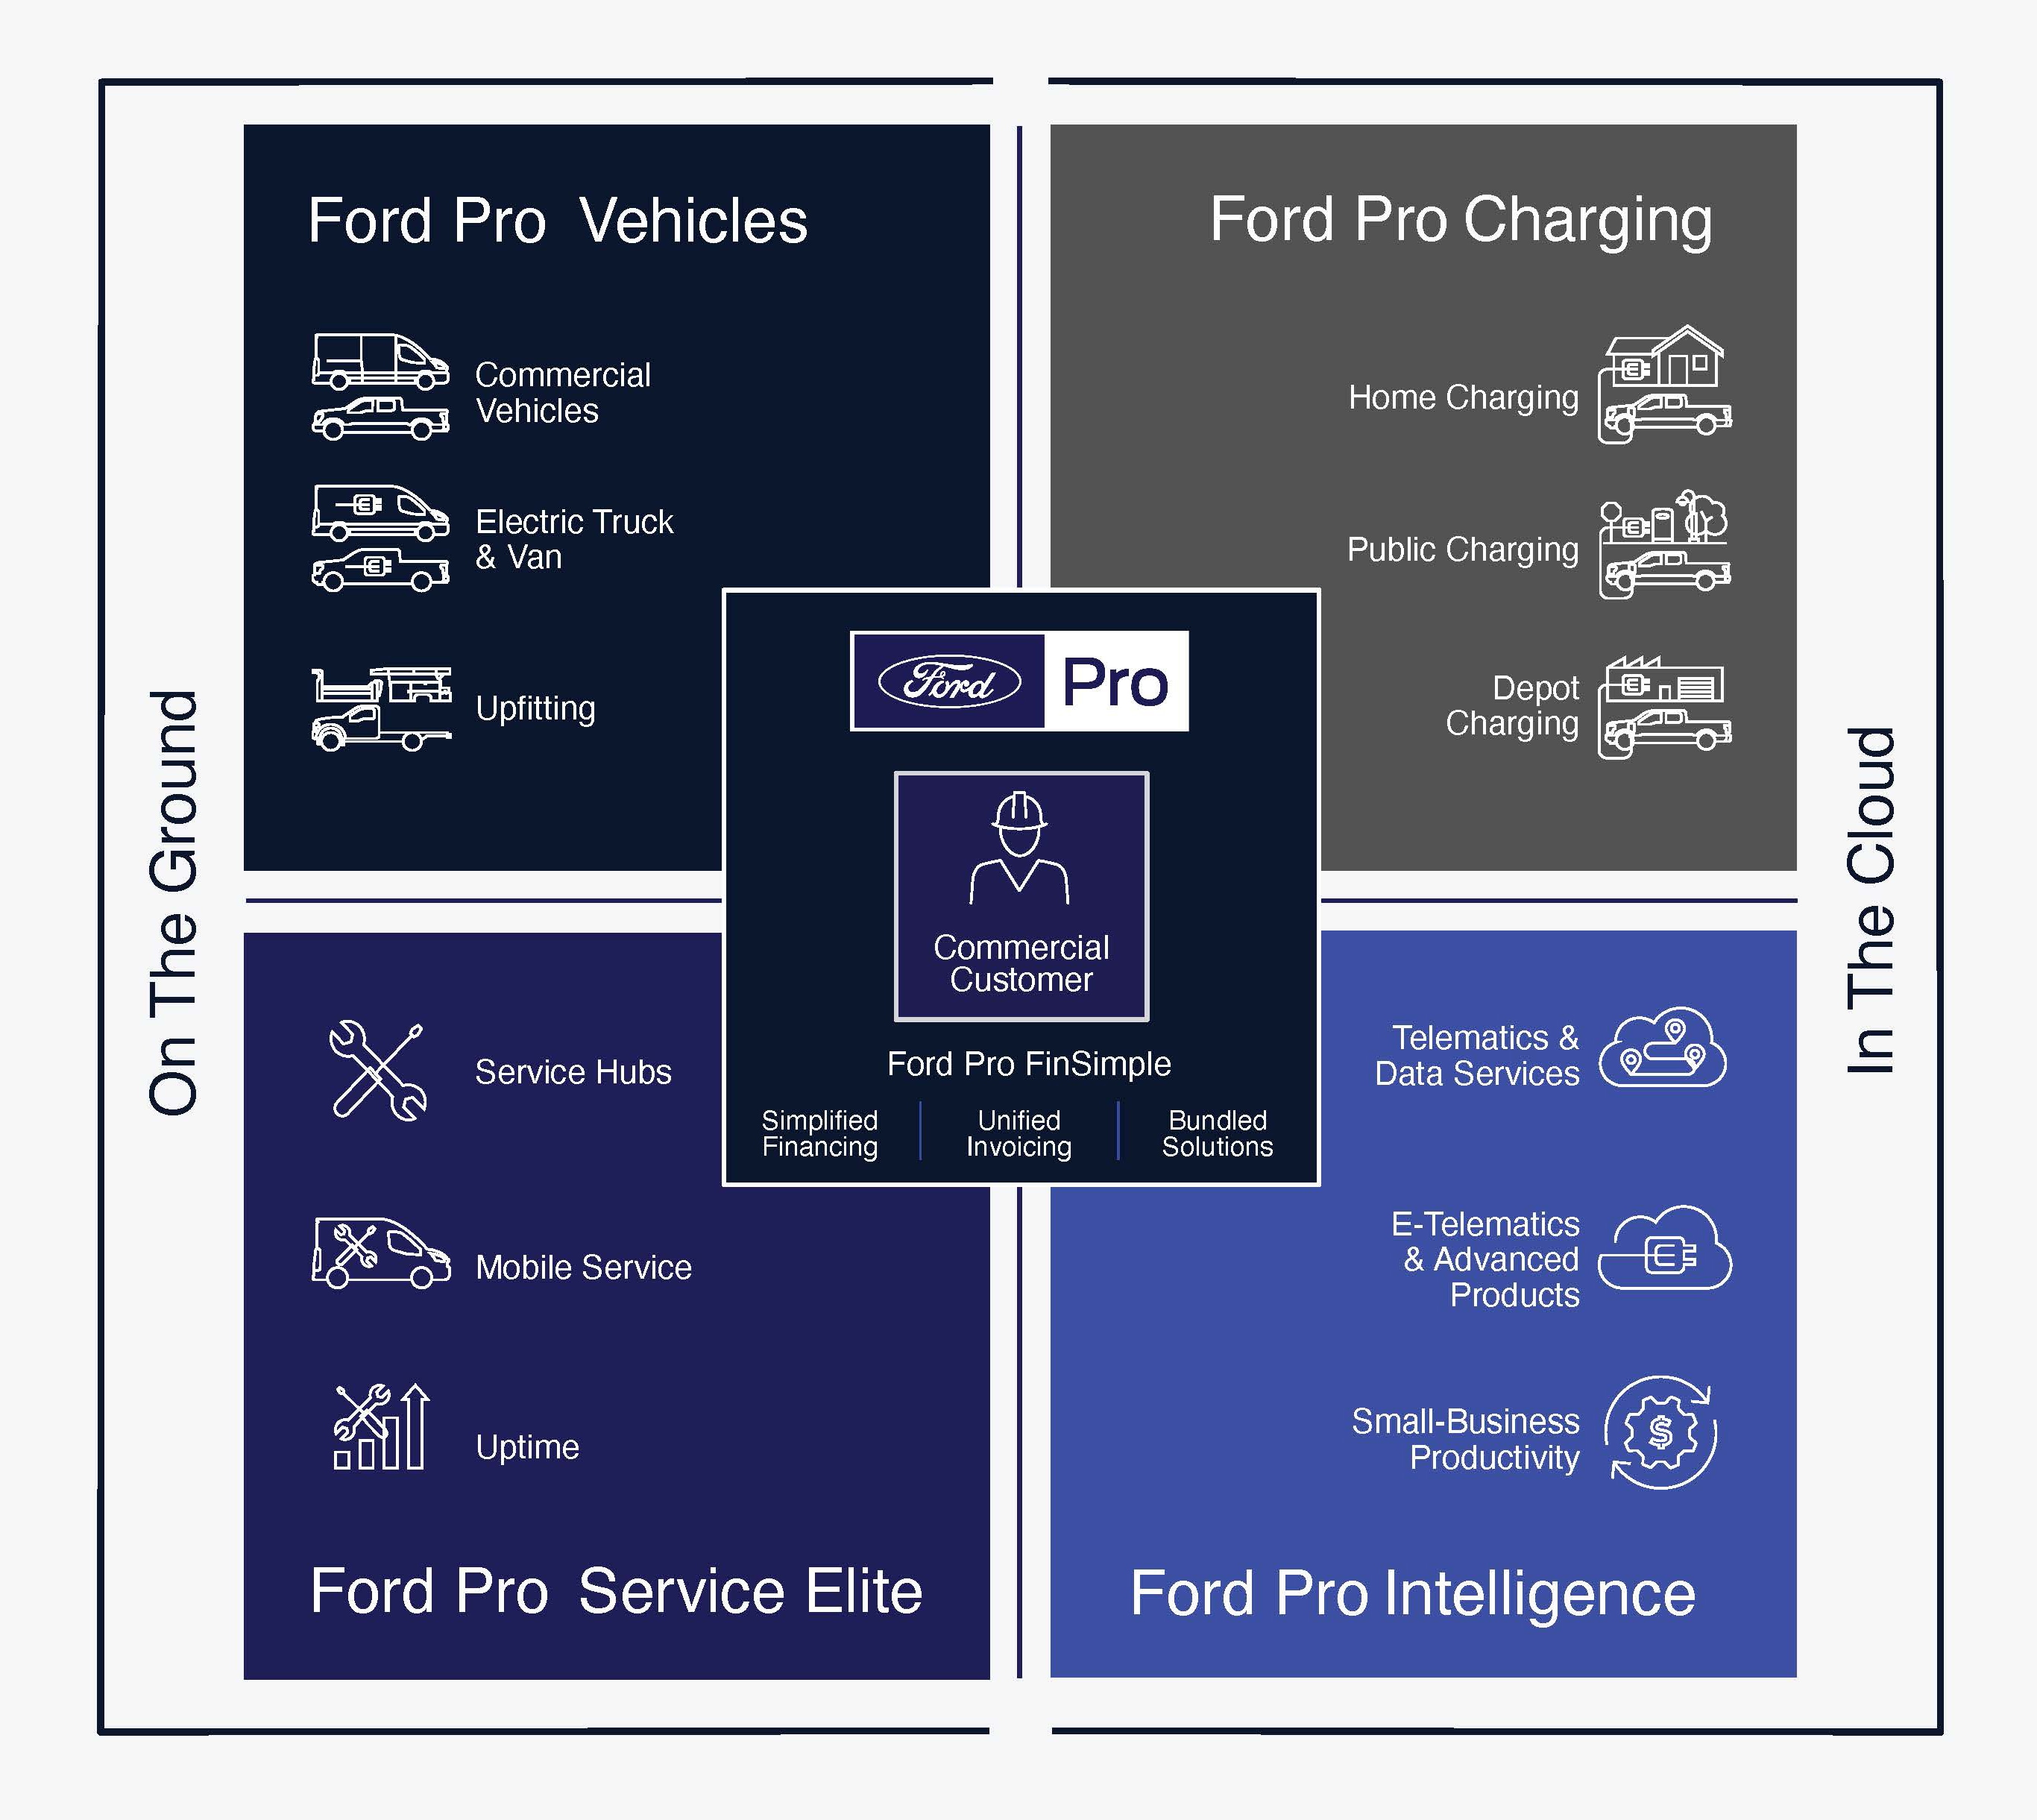 New ‘Ford Pro’ Vehicle Services and Distribution Business Redefining